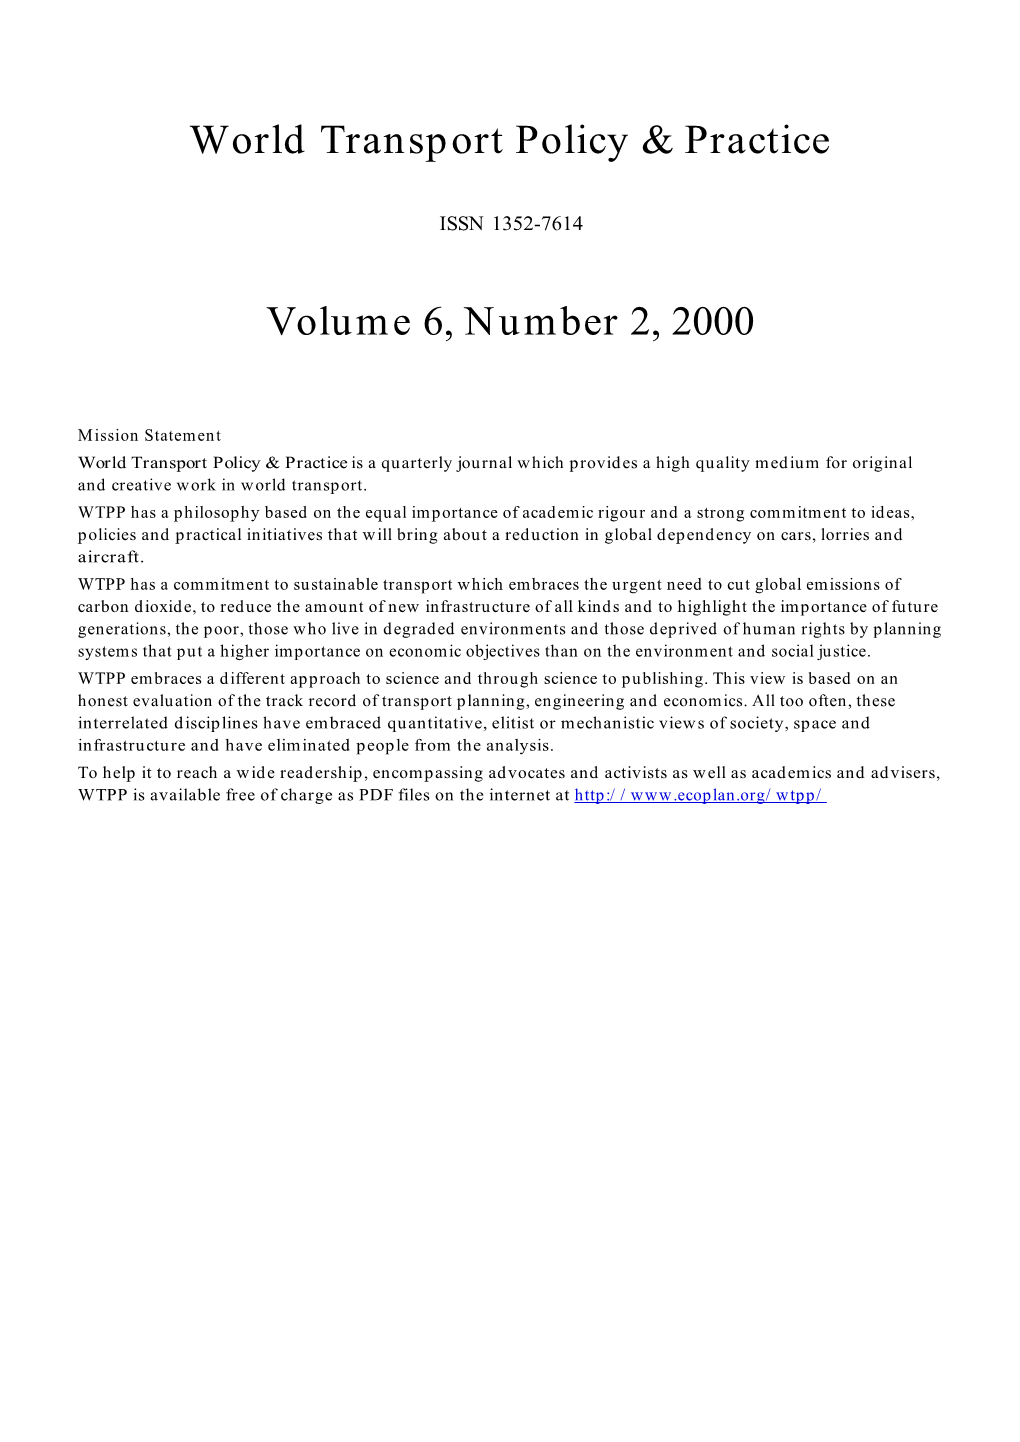 World Transport Policy & Practice Volume 6, Number 2, 2000